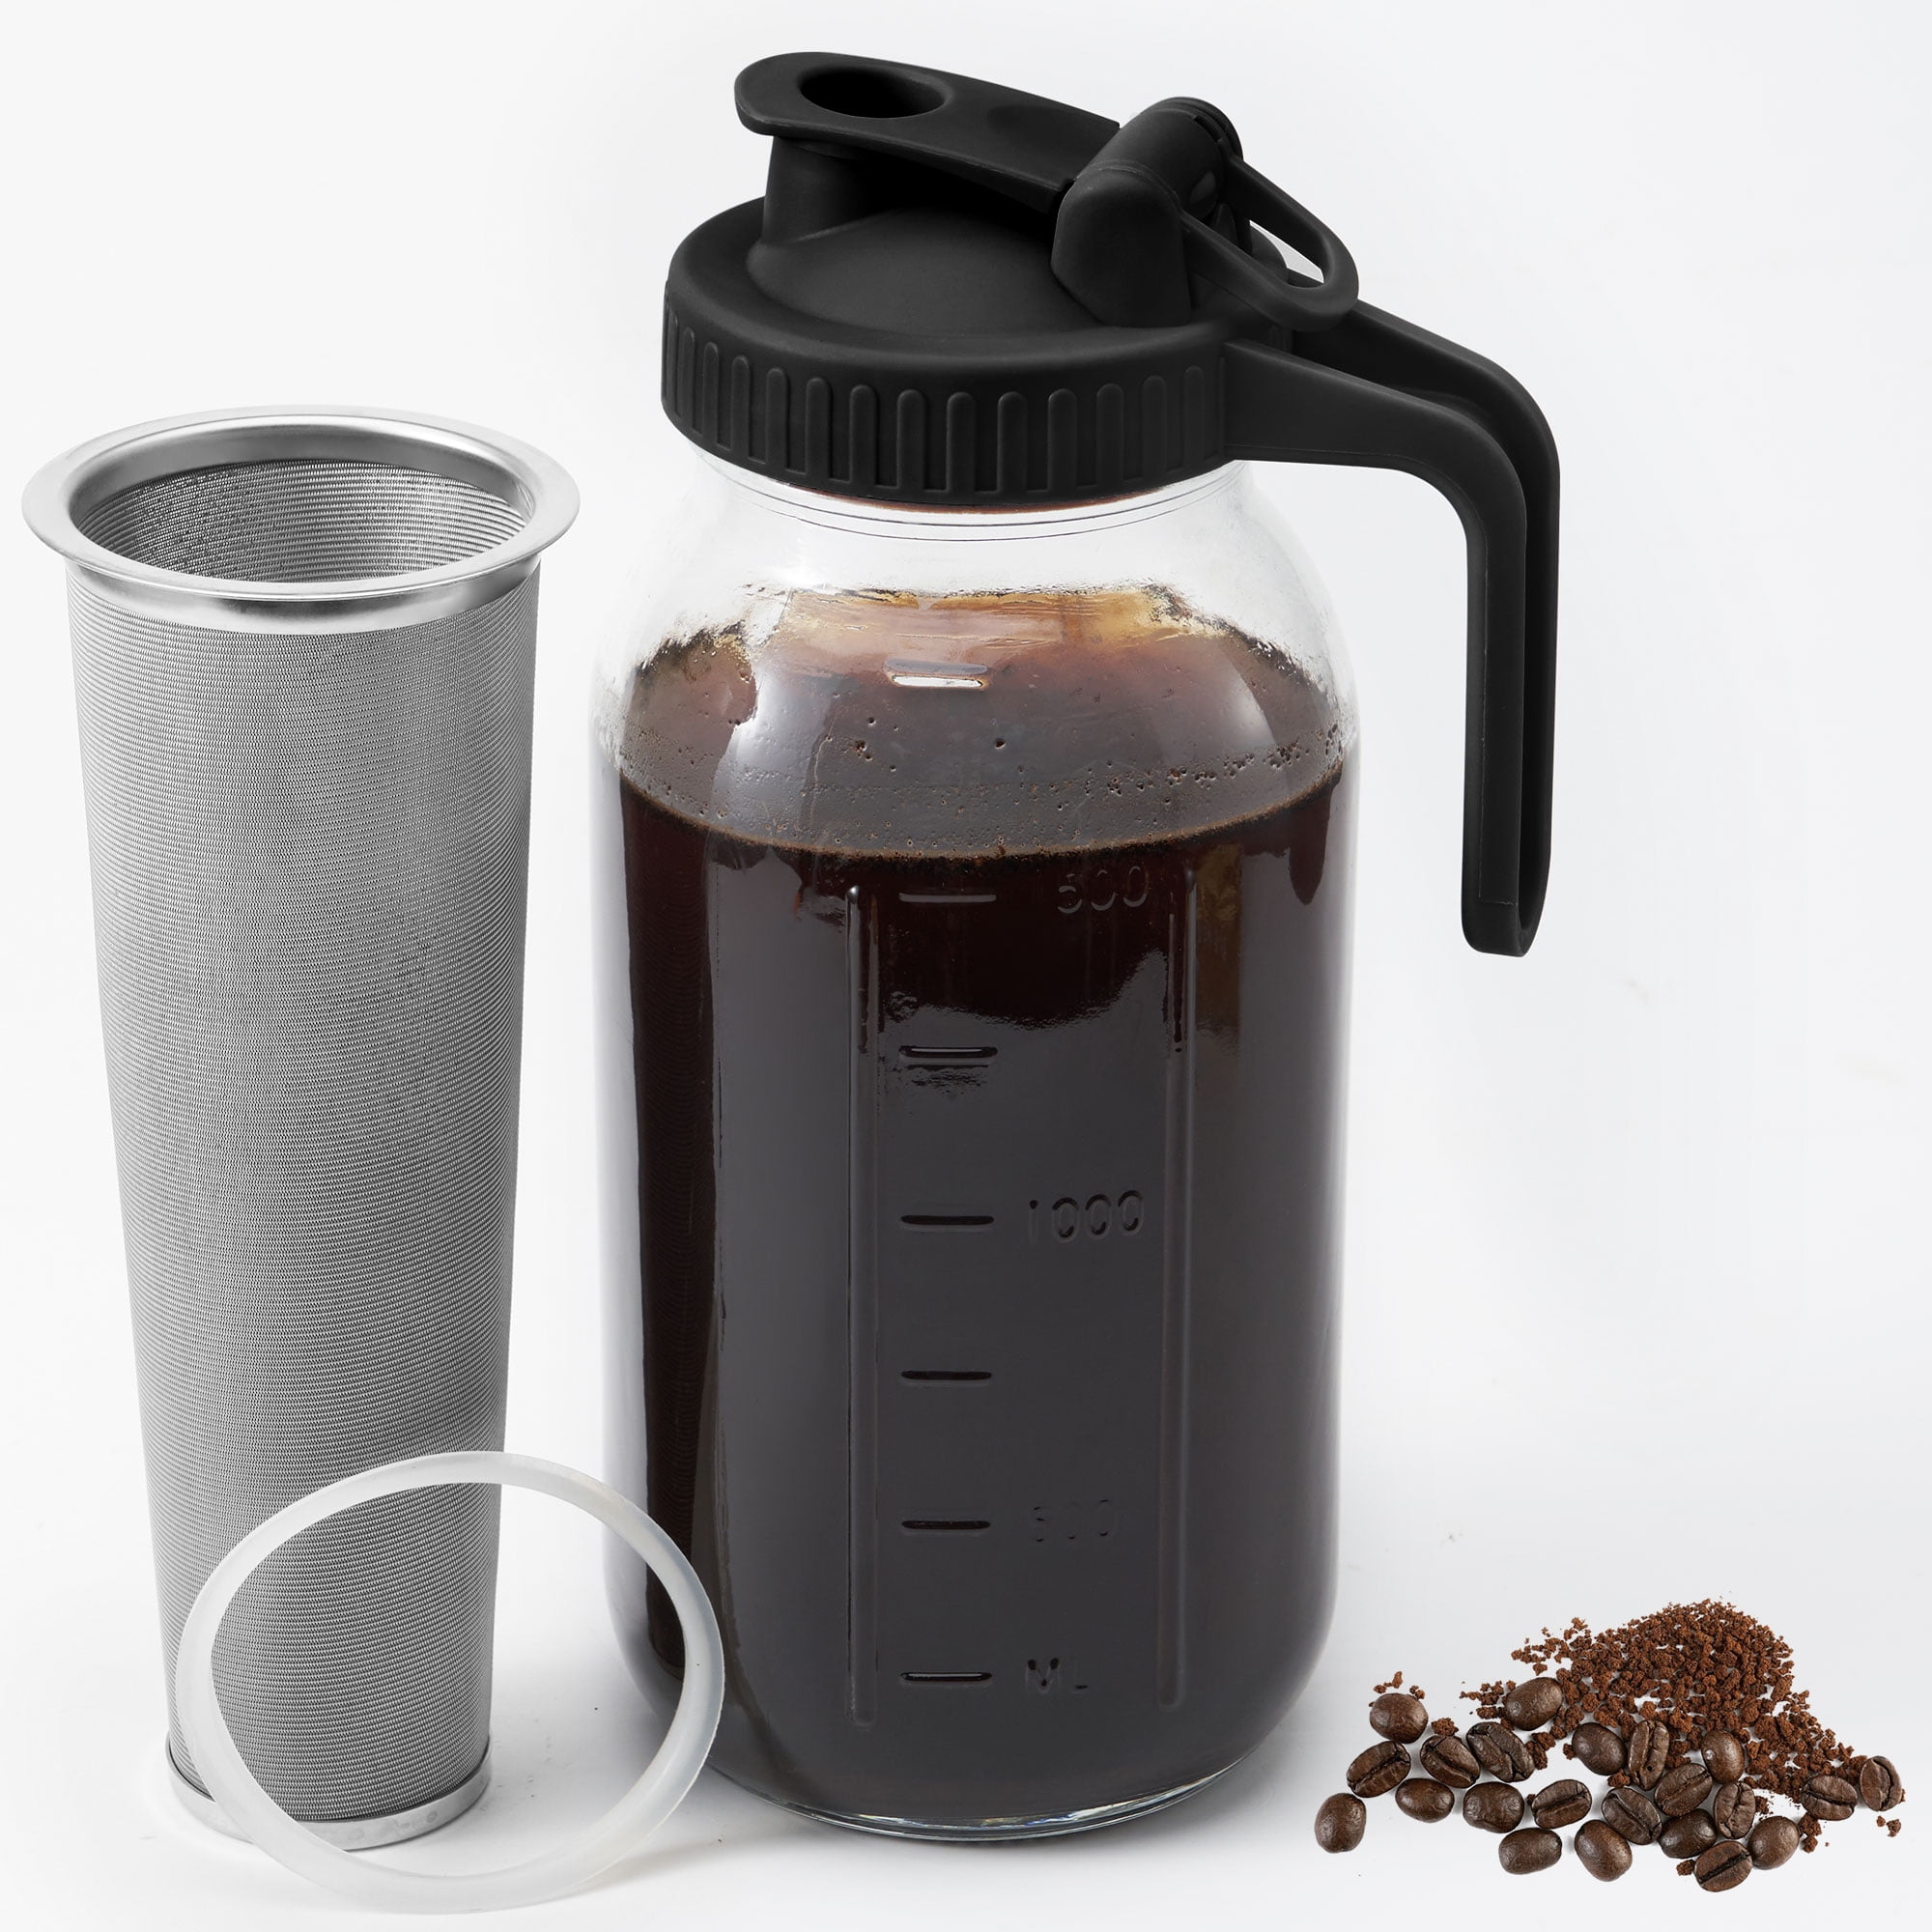 OXO Cold Brew Coffee Maker: Convenient, but not perfect